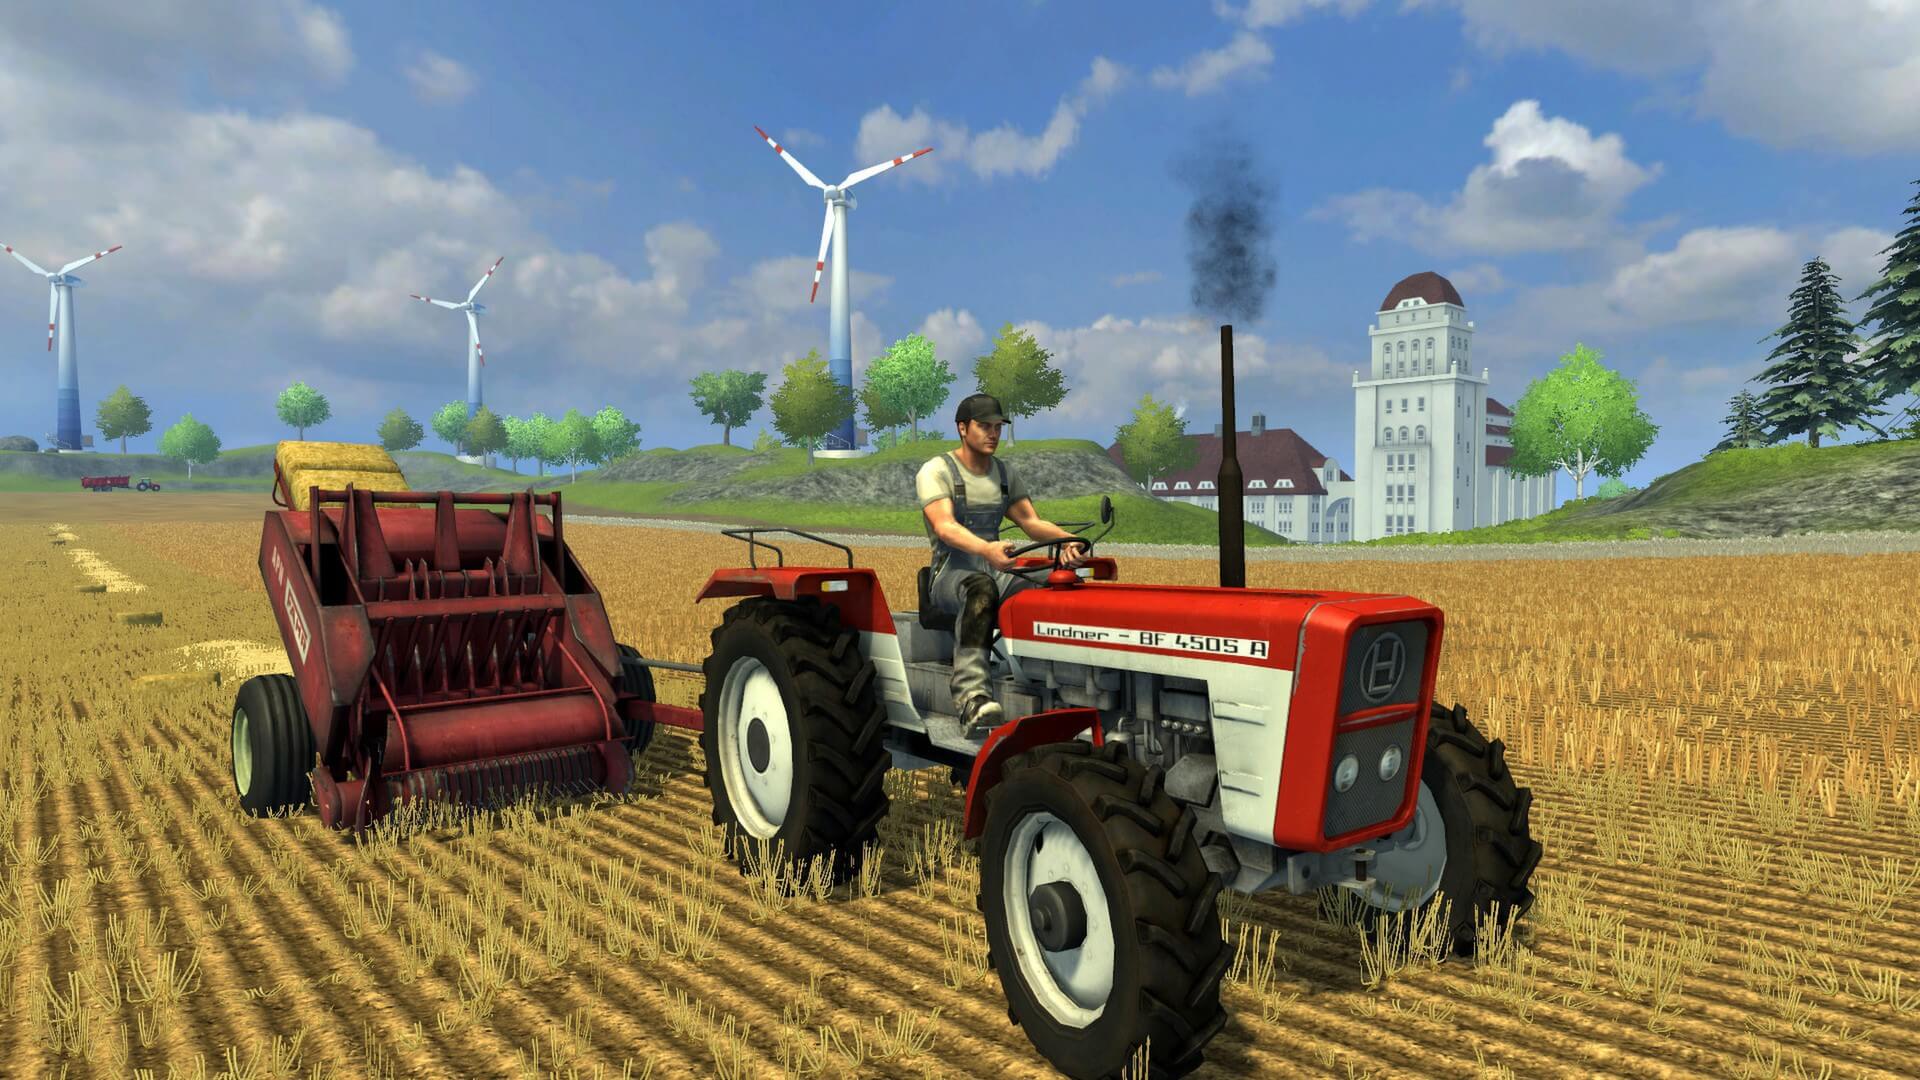 Download Farming Simulator 13 Highly Compressed Full PC Game in 417 MB Only !! - TraX Gaming Center